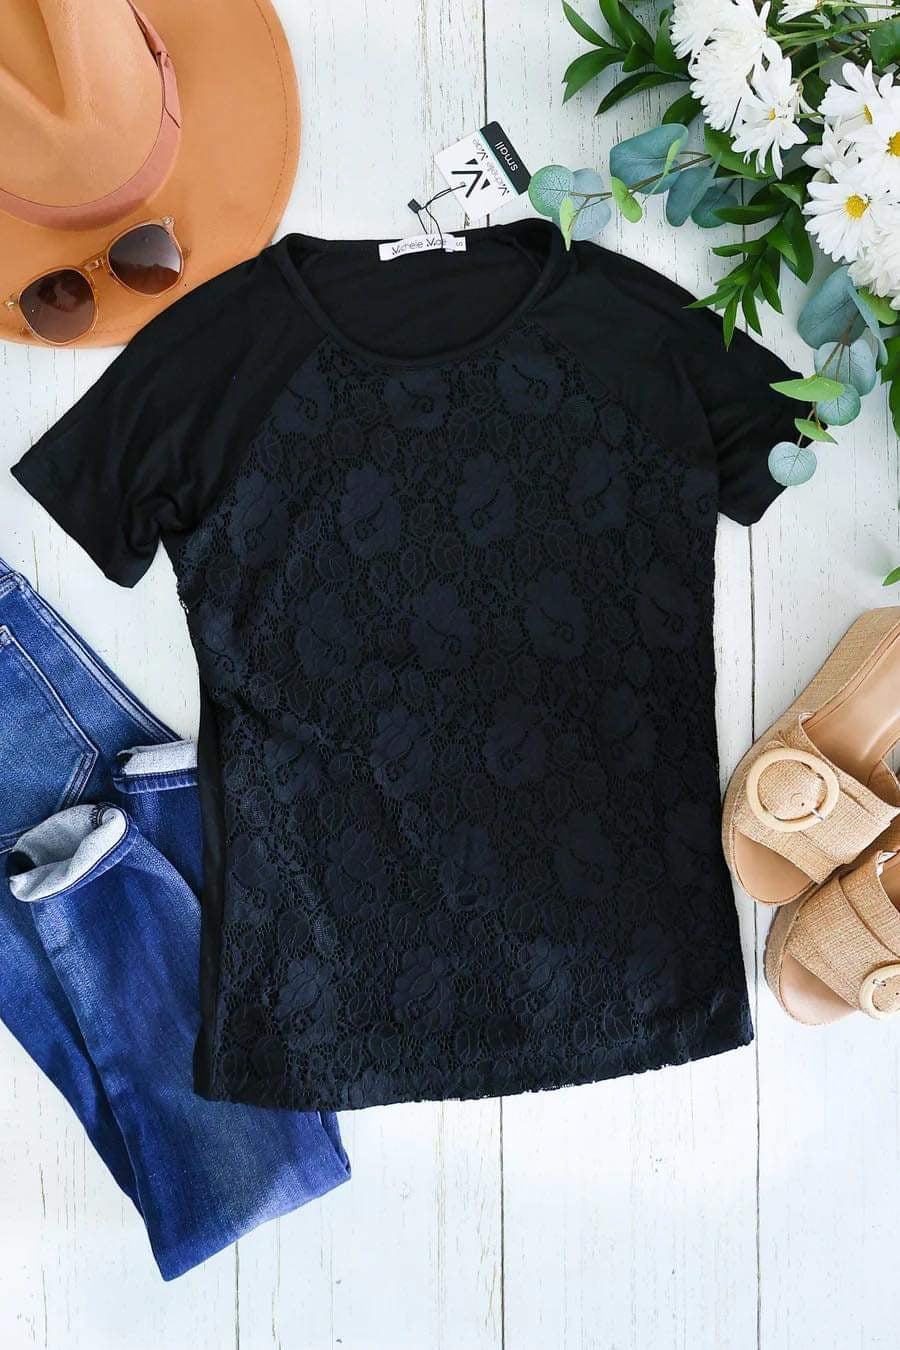 STRETCHY LACE BLACK TOP